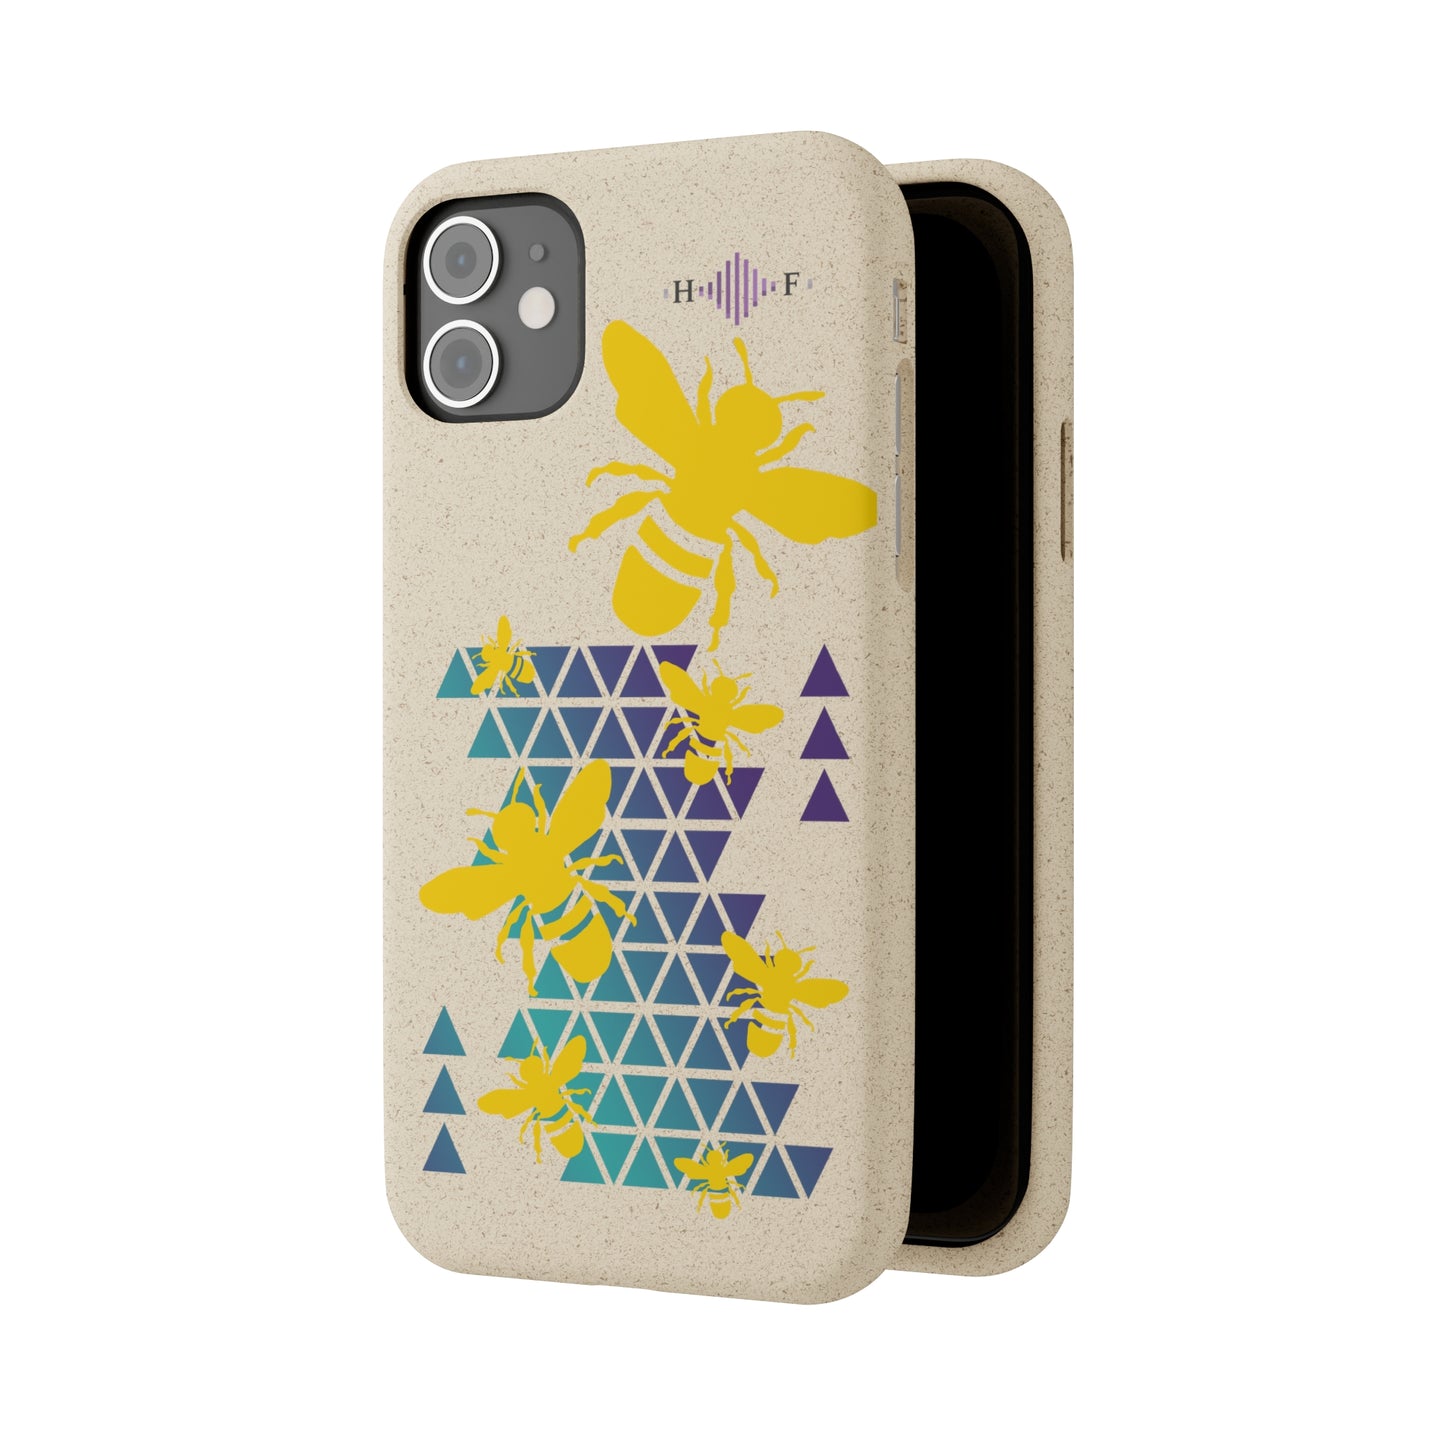 Golden Bees ECO FRIENDLY - Biodegradable Cases